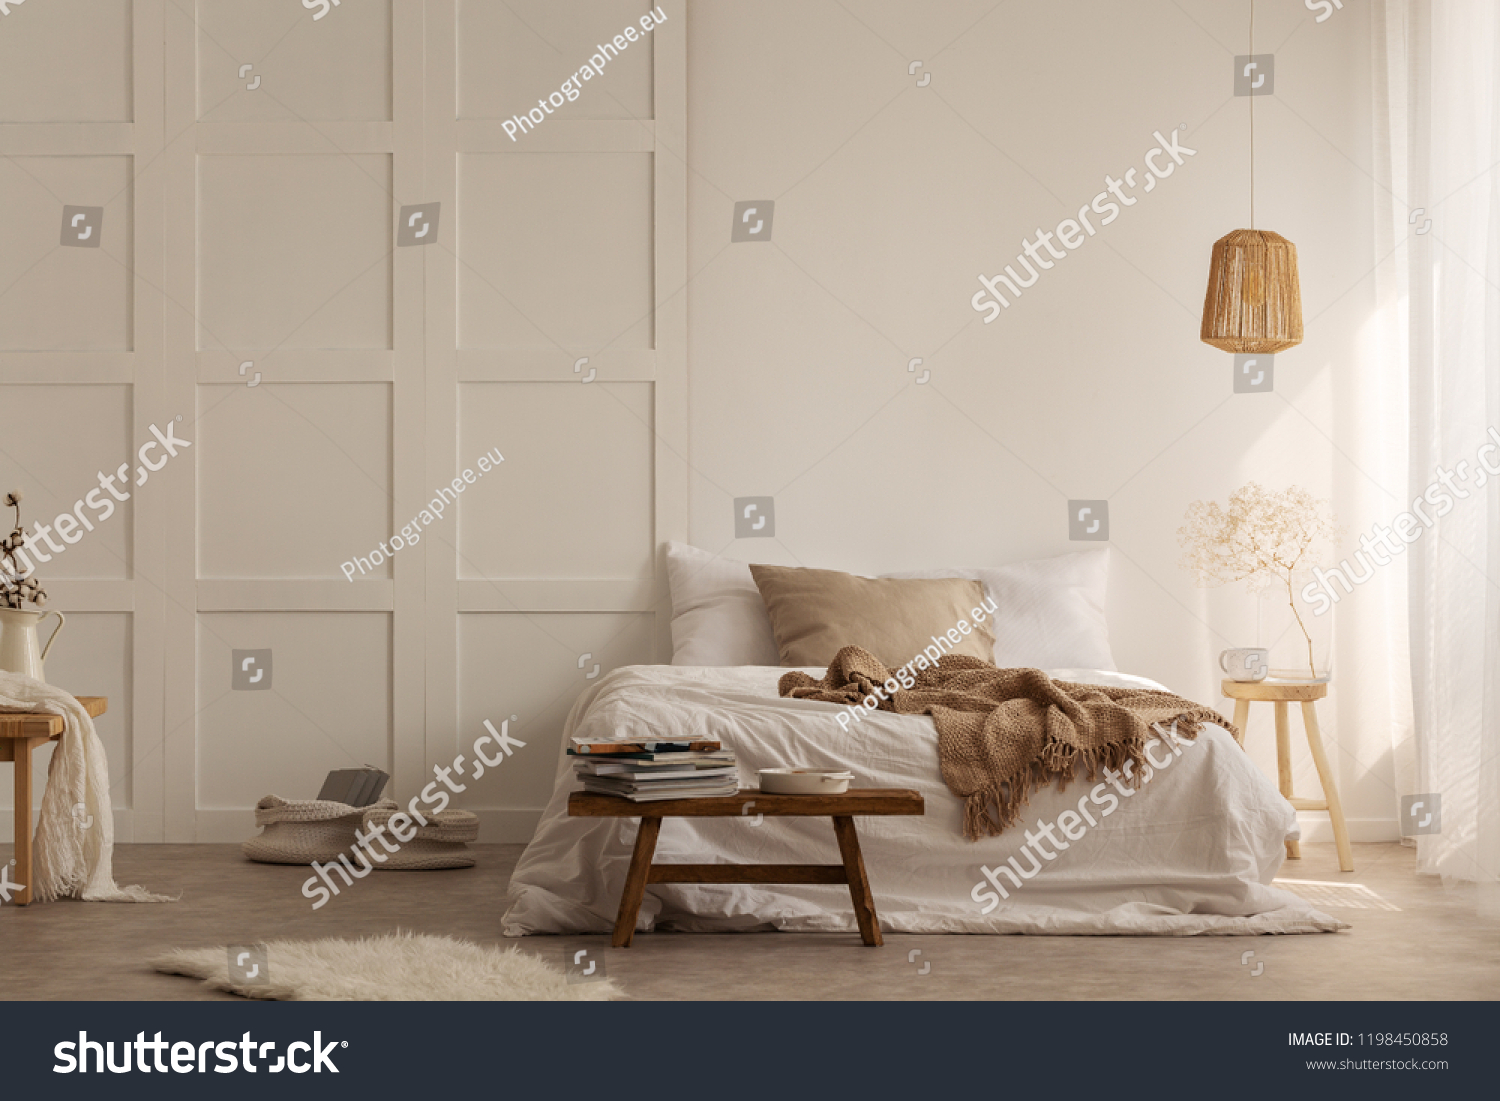 Natural blanket on white bed in simple bedroom interior with fur next to wooden stool. Real photo #1198450858